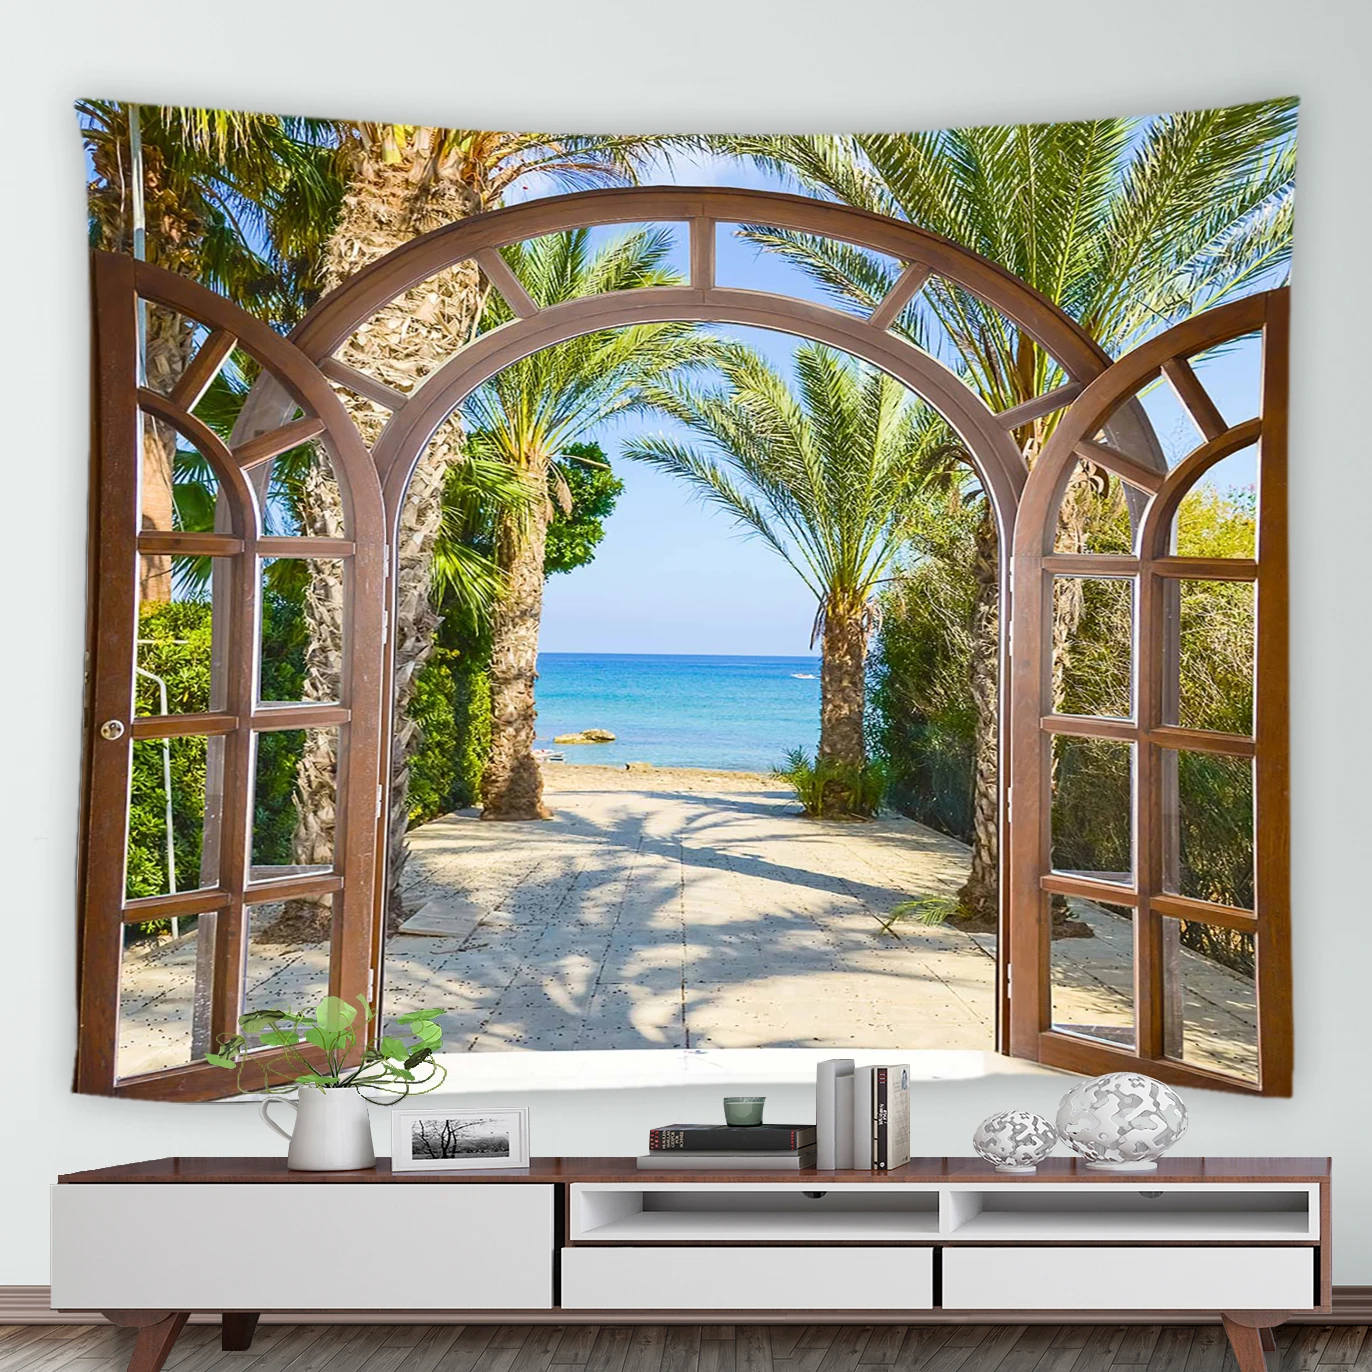 

Outside the Window Ocean Palm Trees Tapestry Tropical Natural Scenery Tapestries Landscape Wall Hanging Picnic Mat Beach Blanket